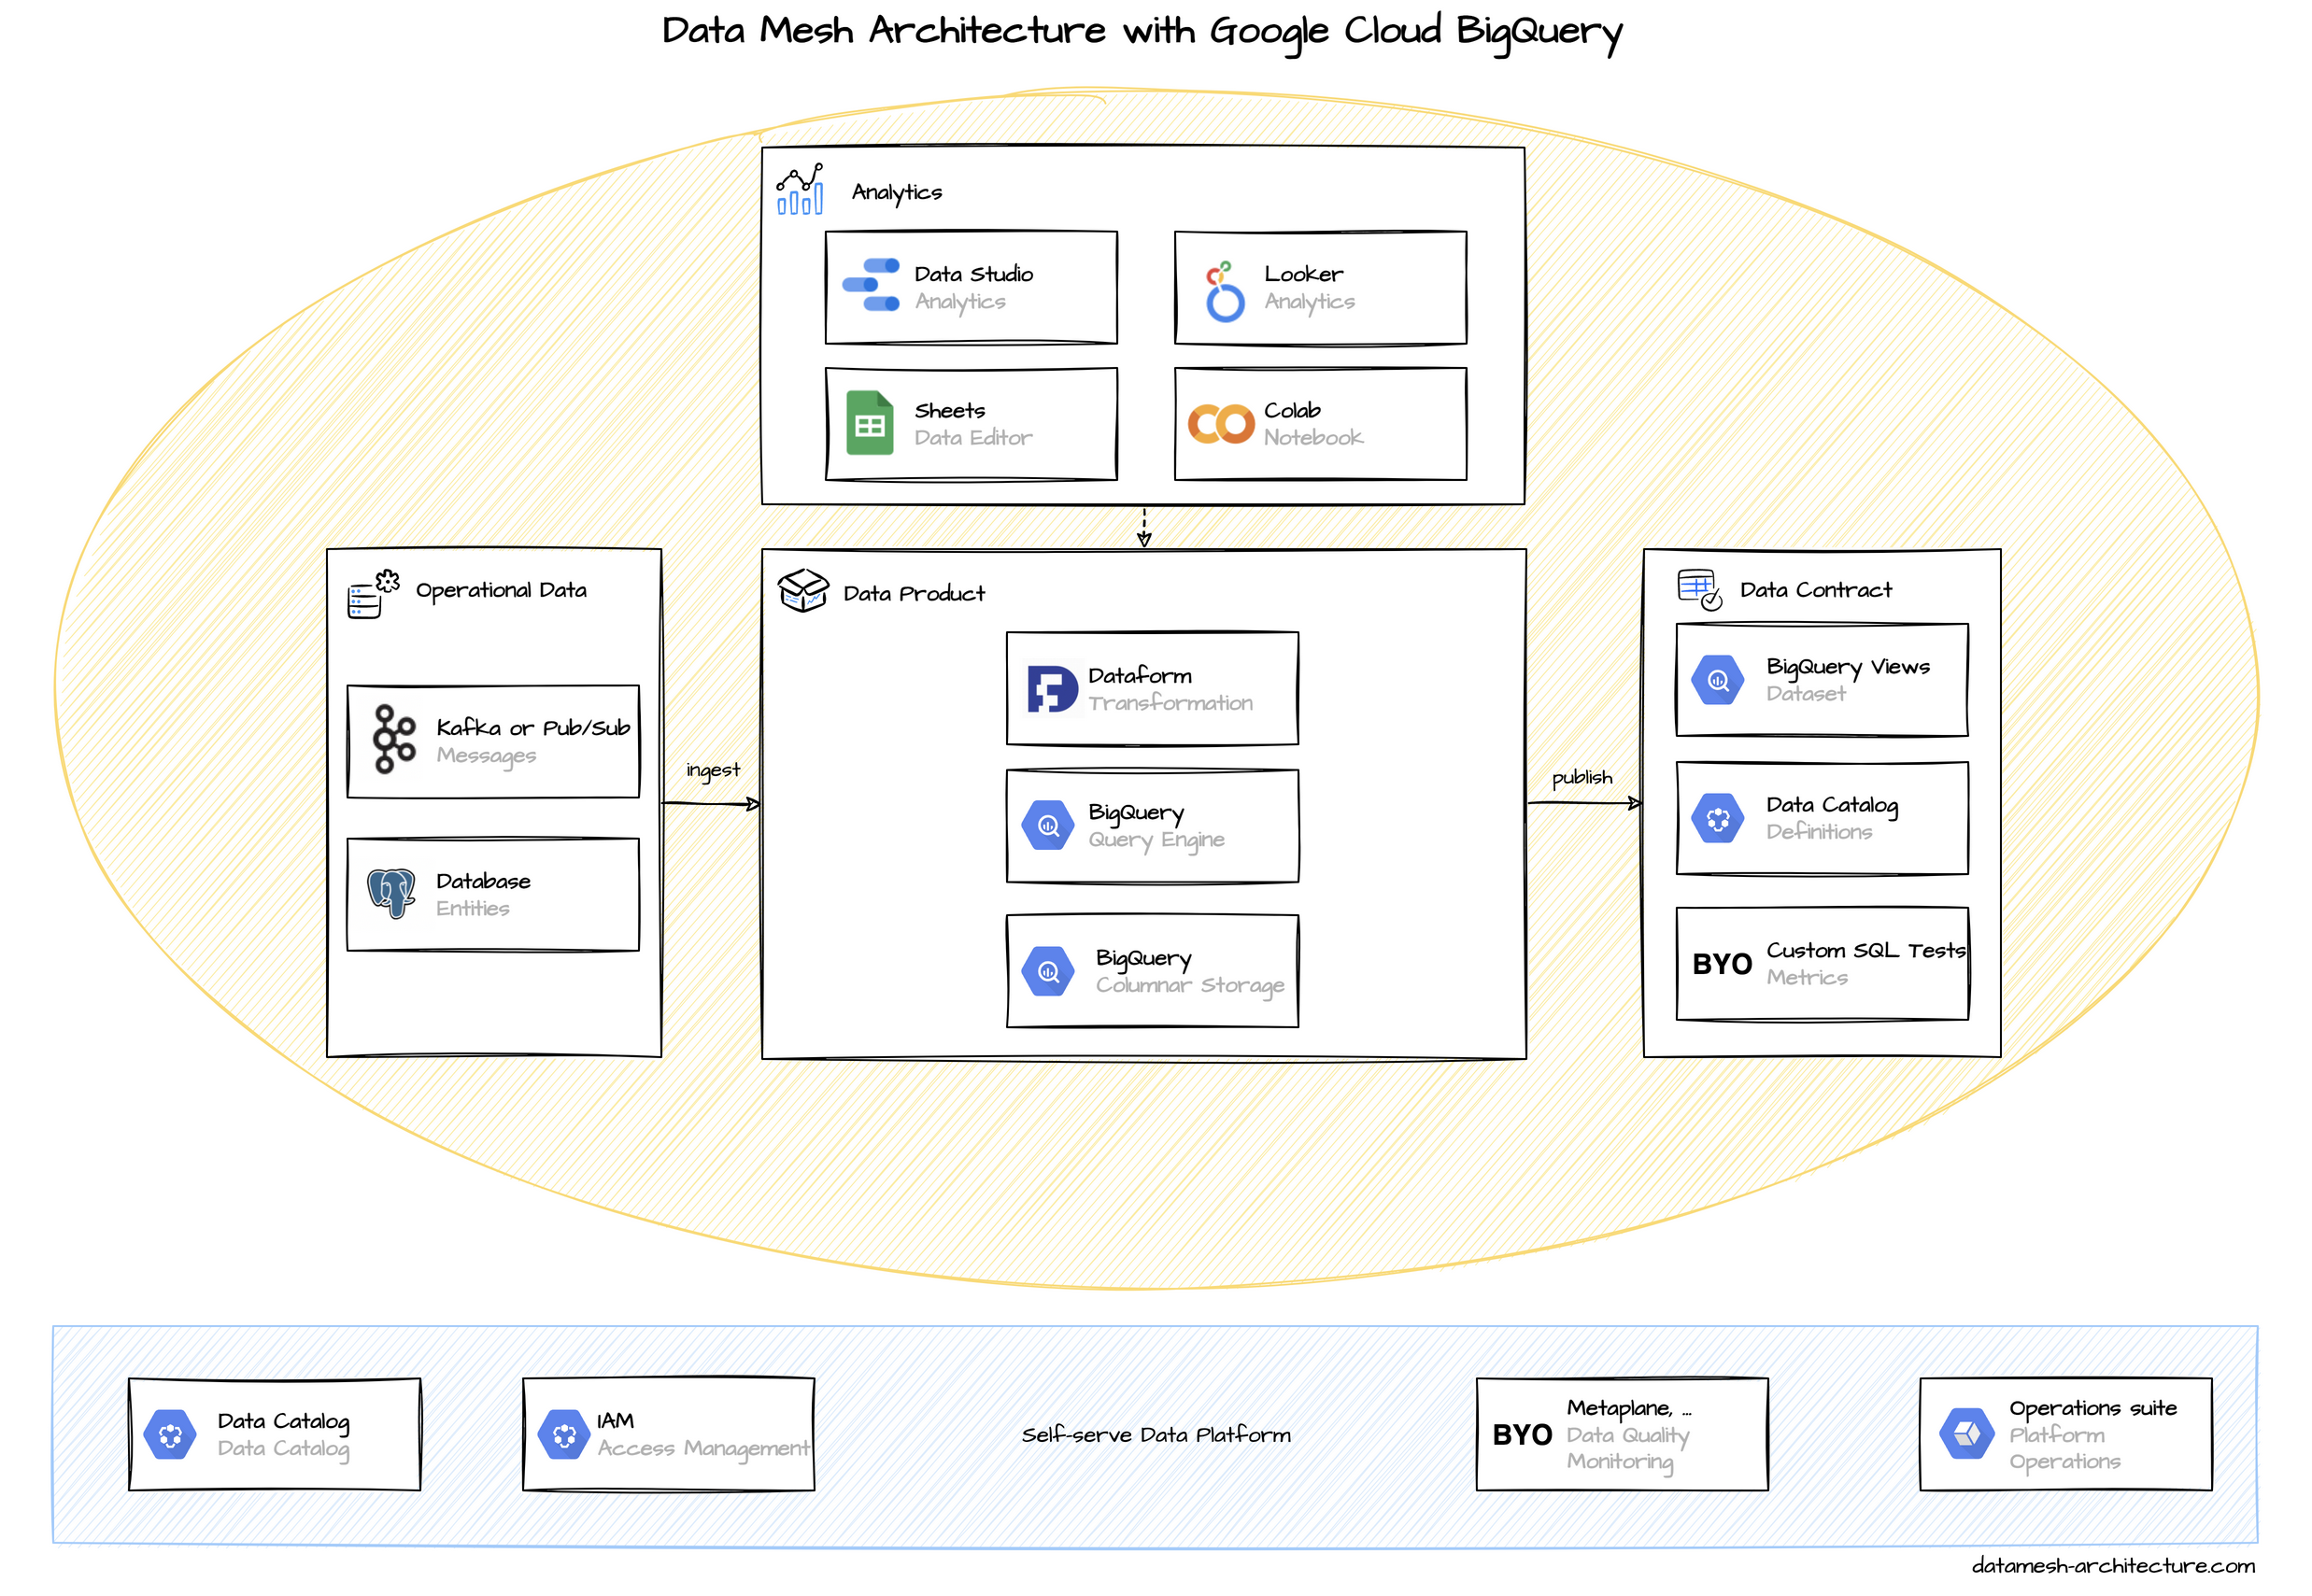 Data Mesh Architecture with Google Cloud BigQuery